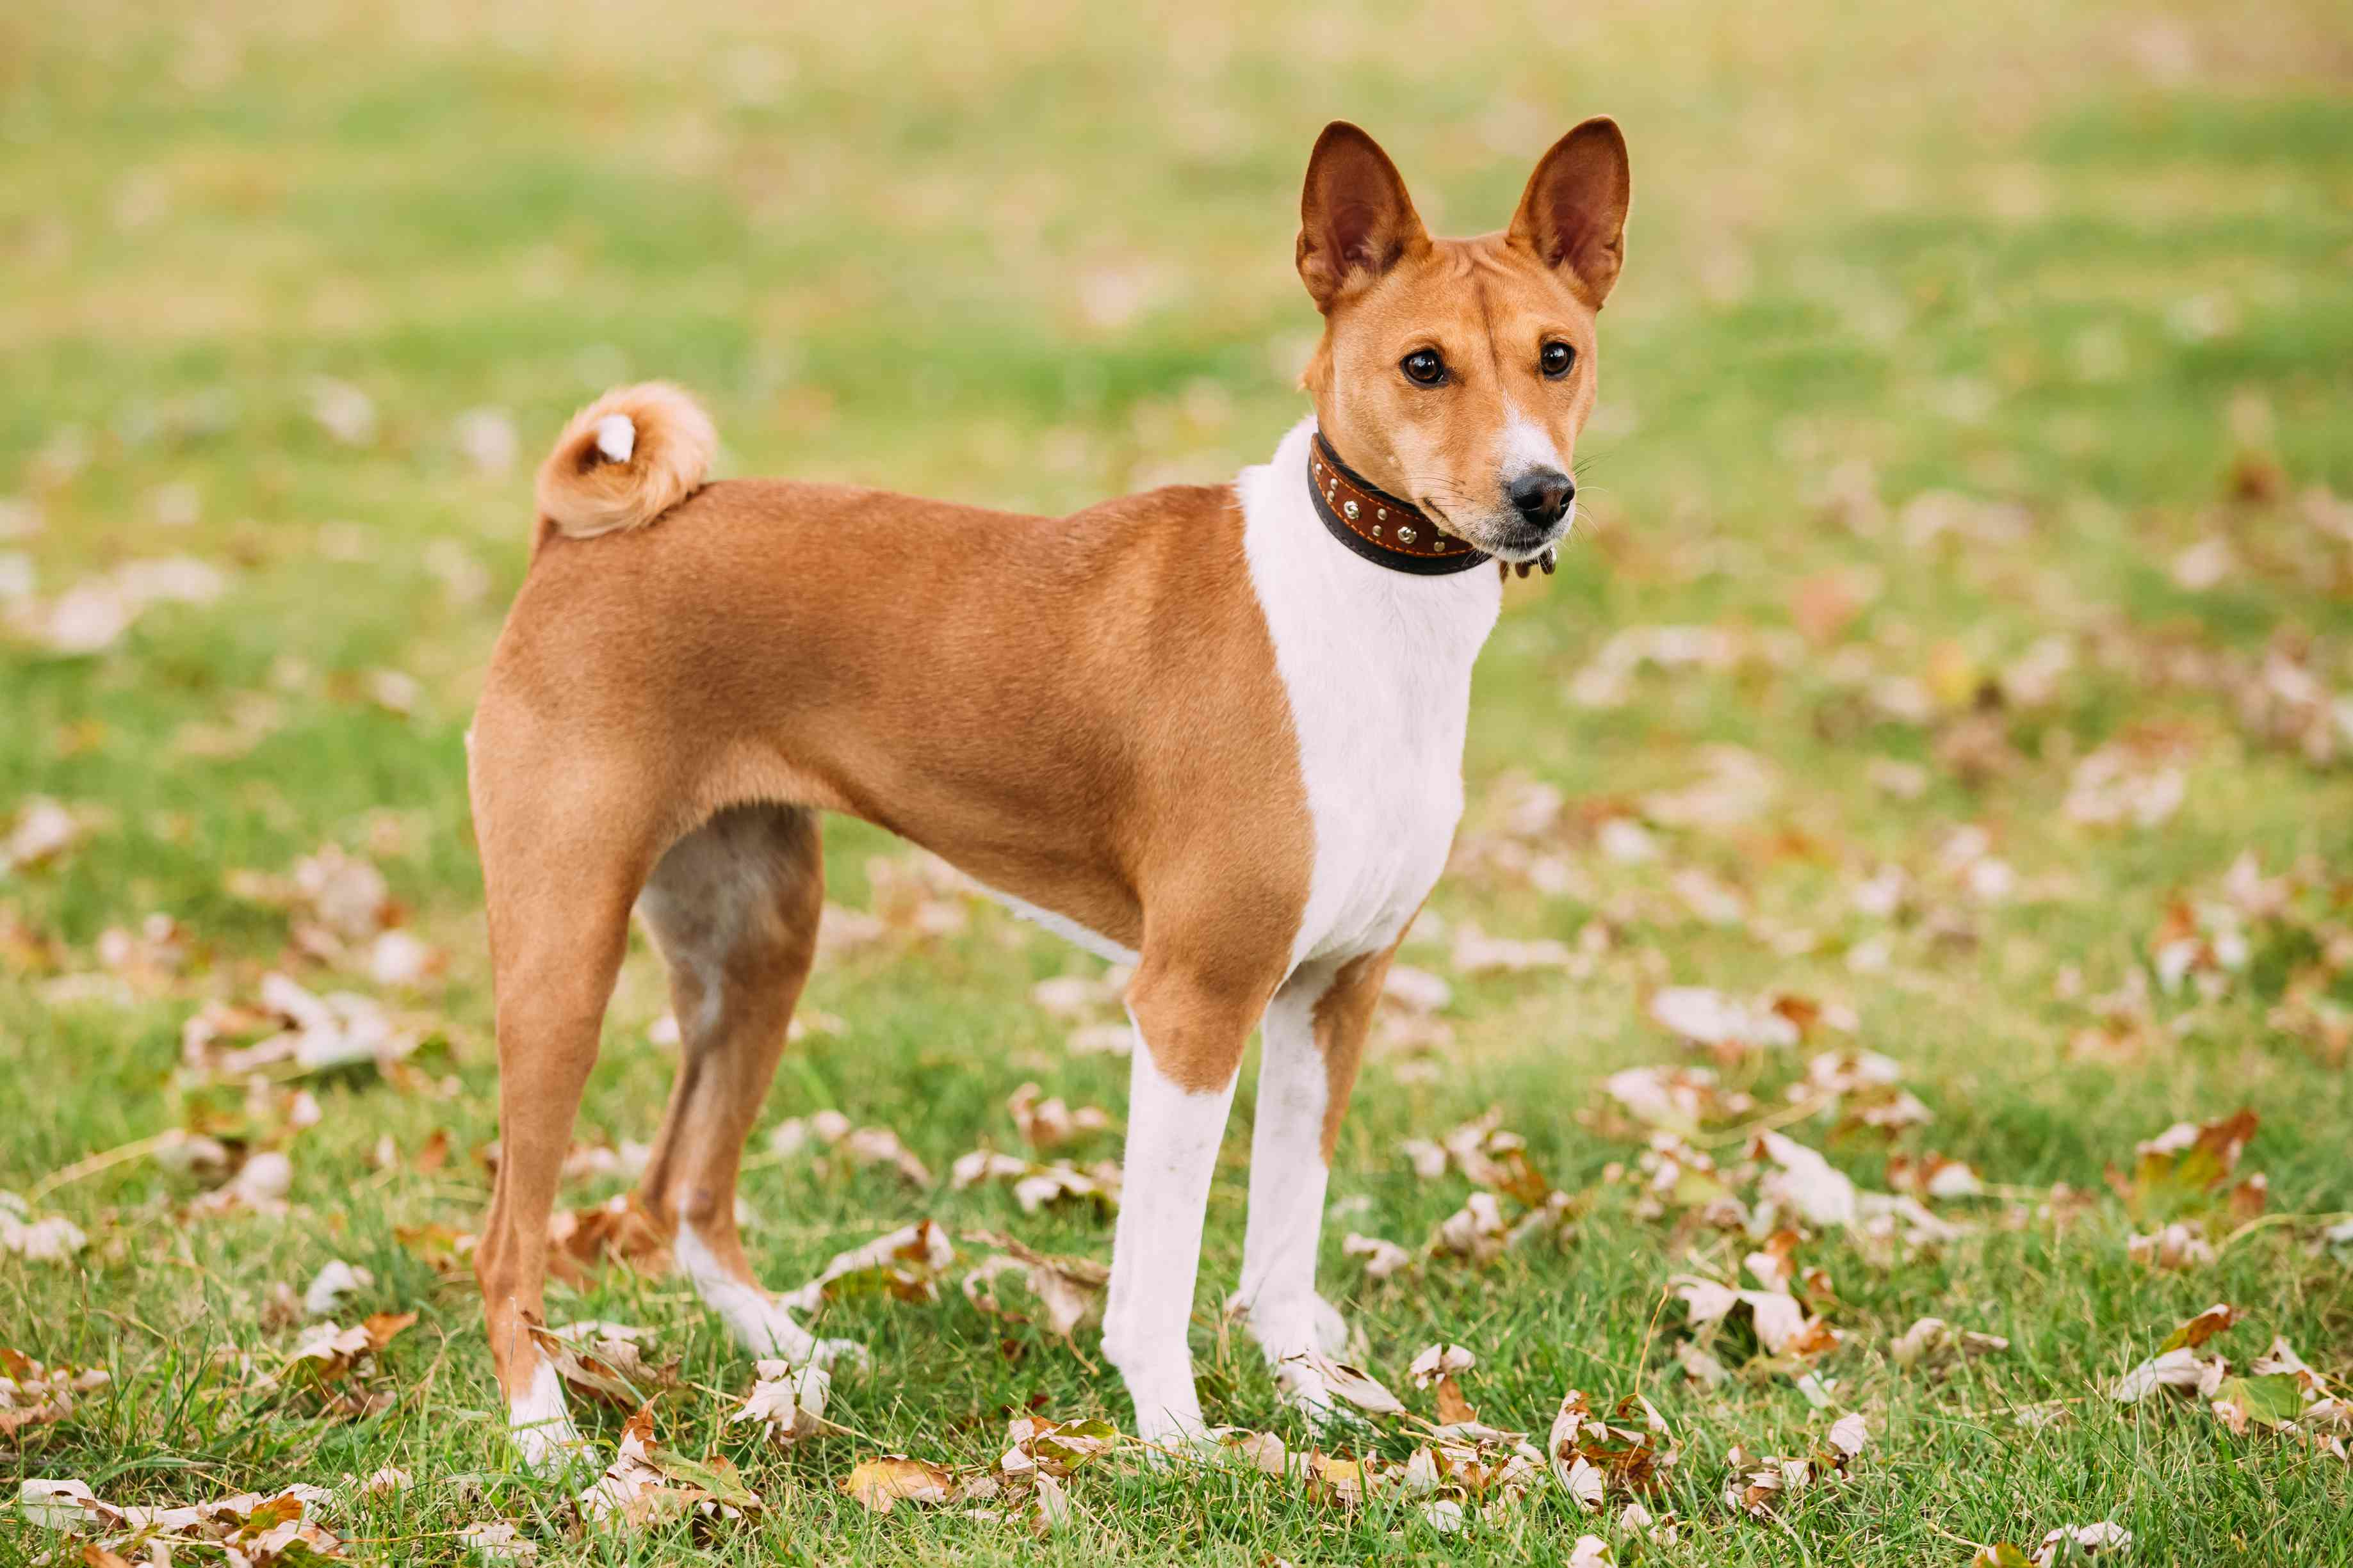 Basenji standing in grass with dried leaves